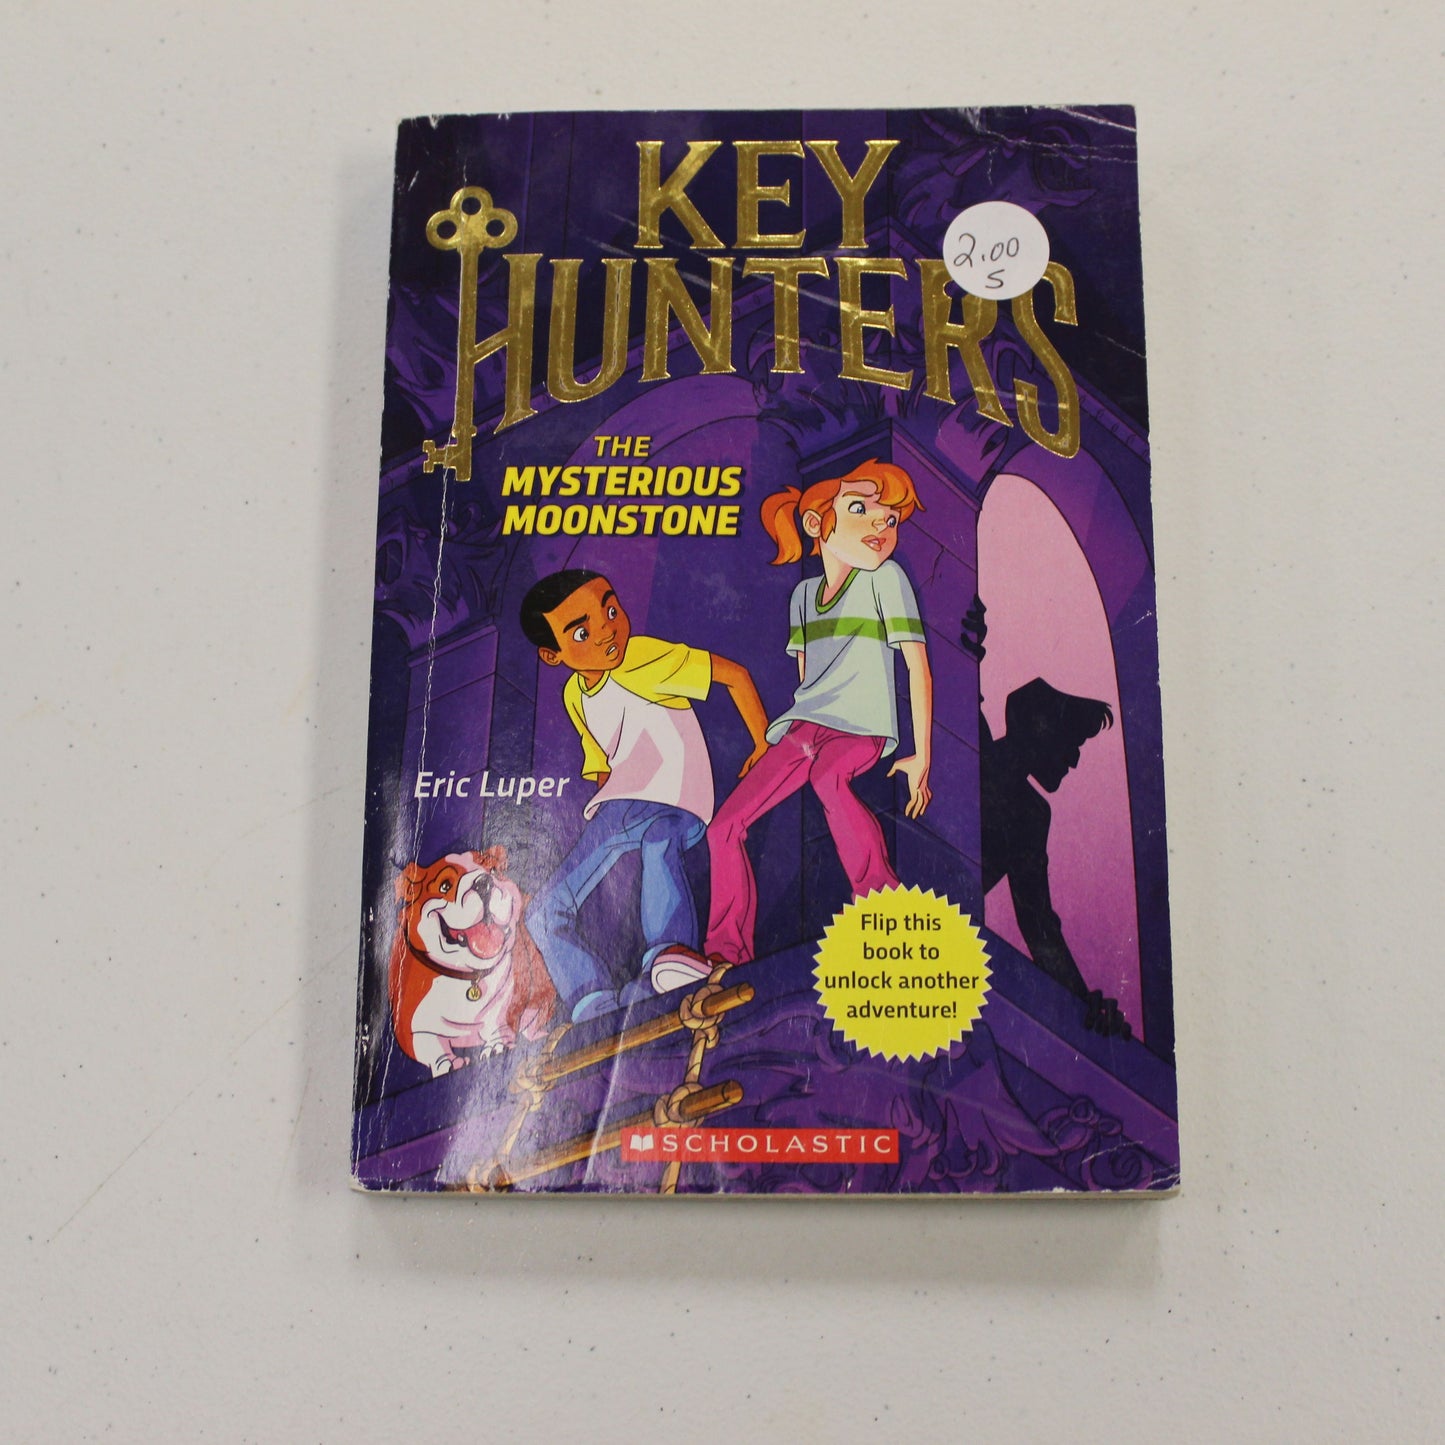 KEY HUNTERS: THE MYSTERIOUS MOONSTONE